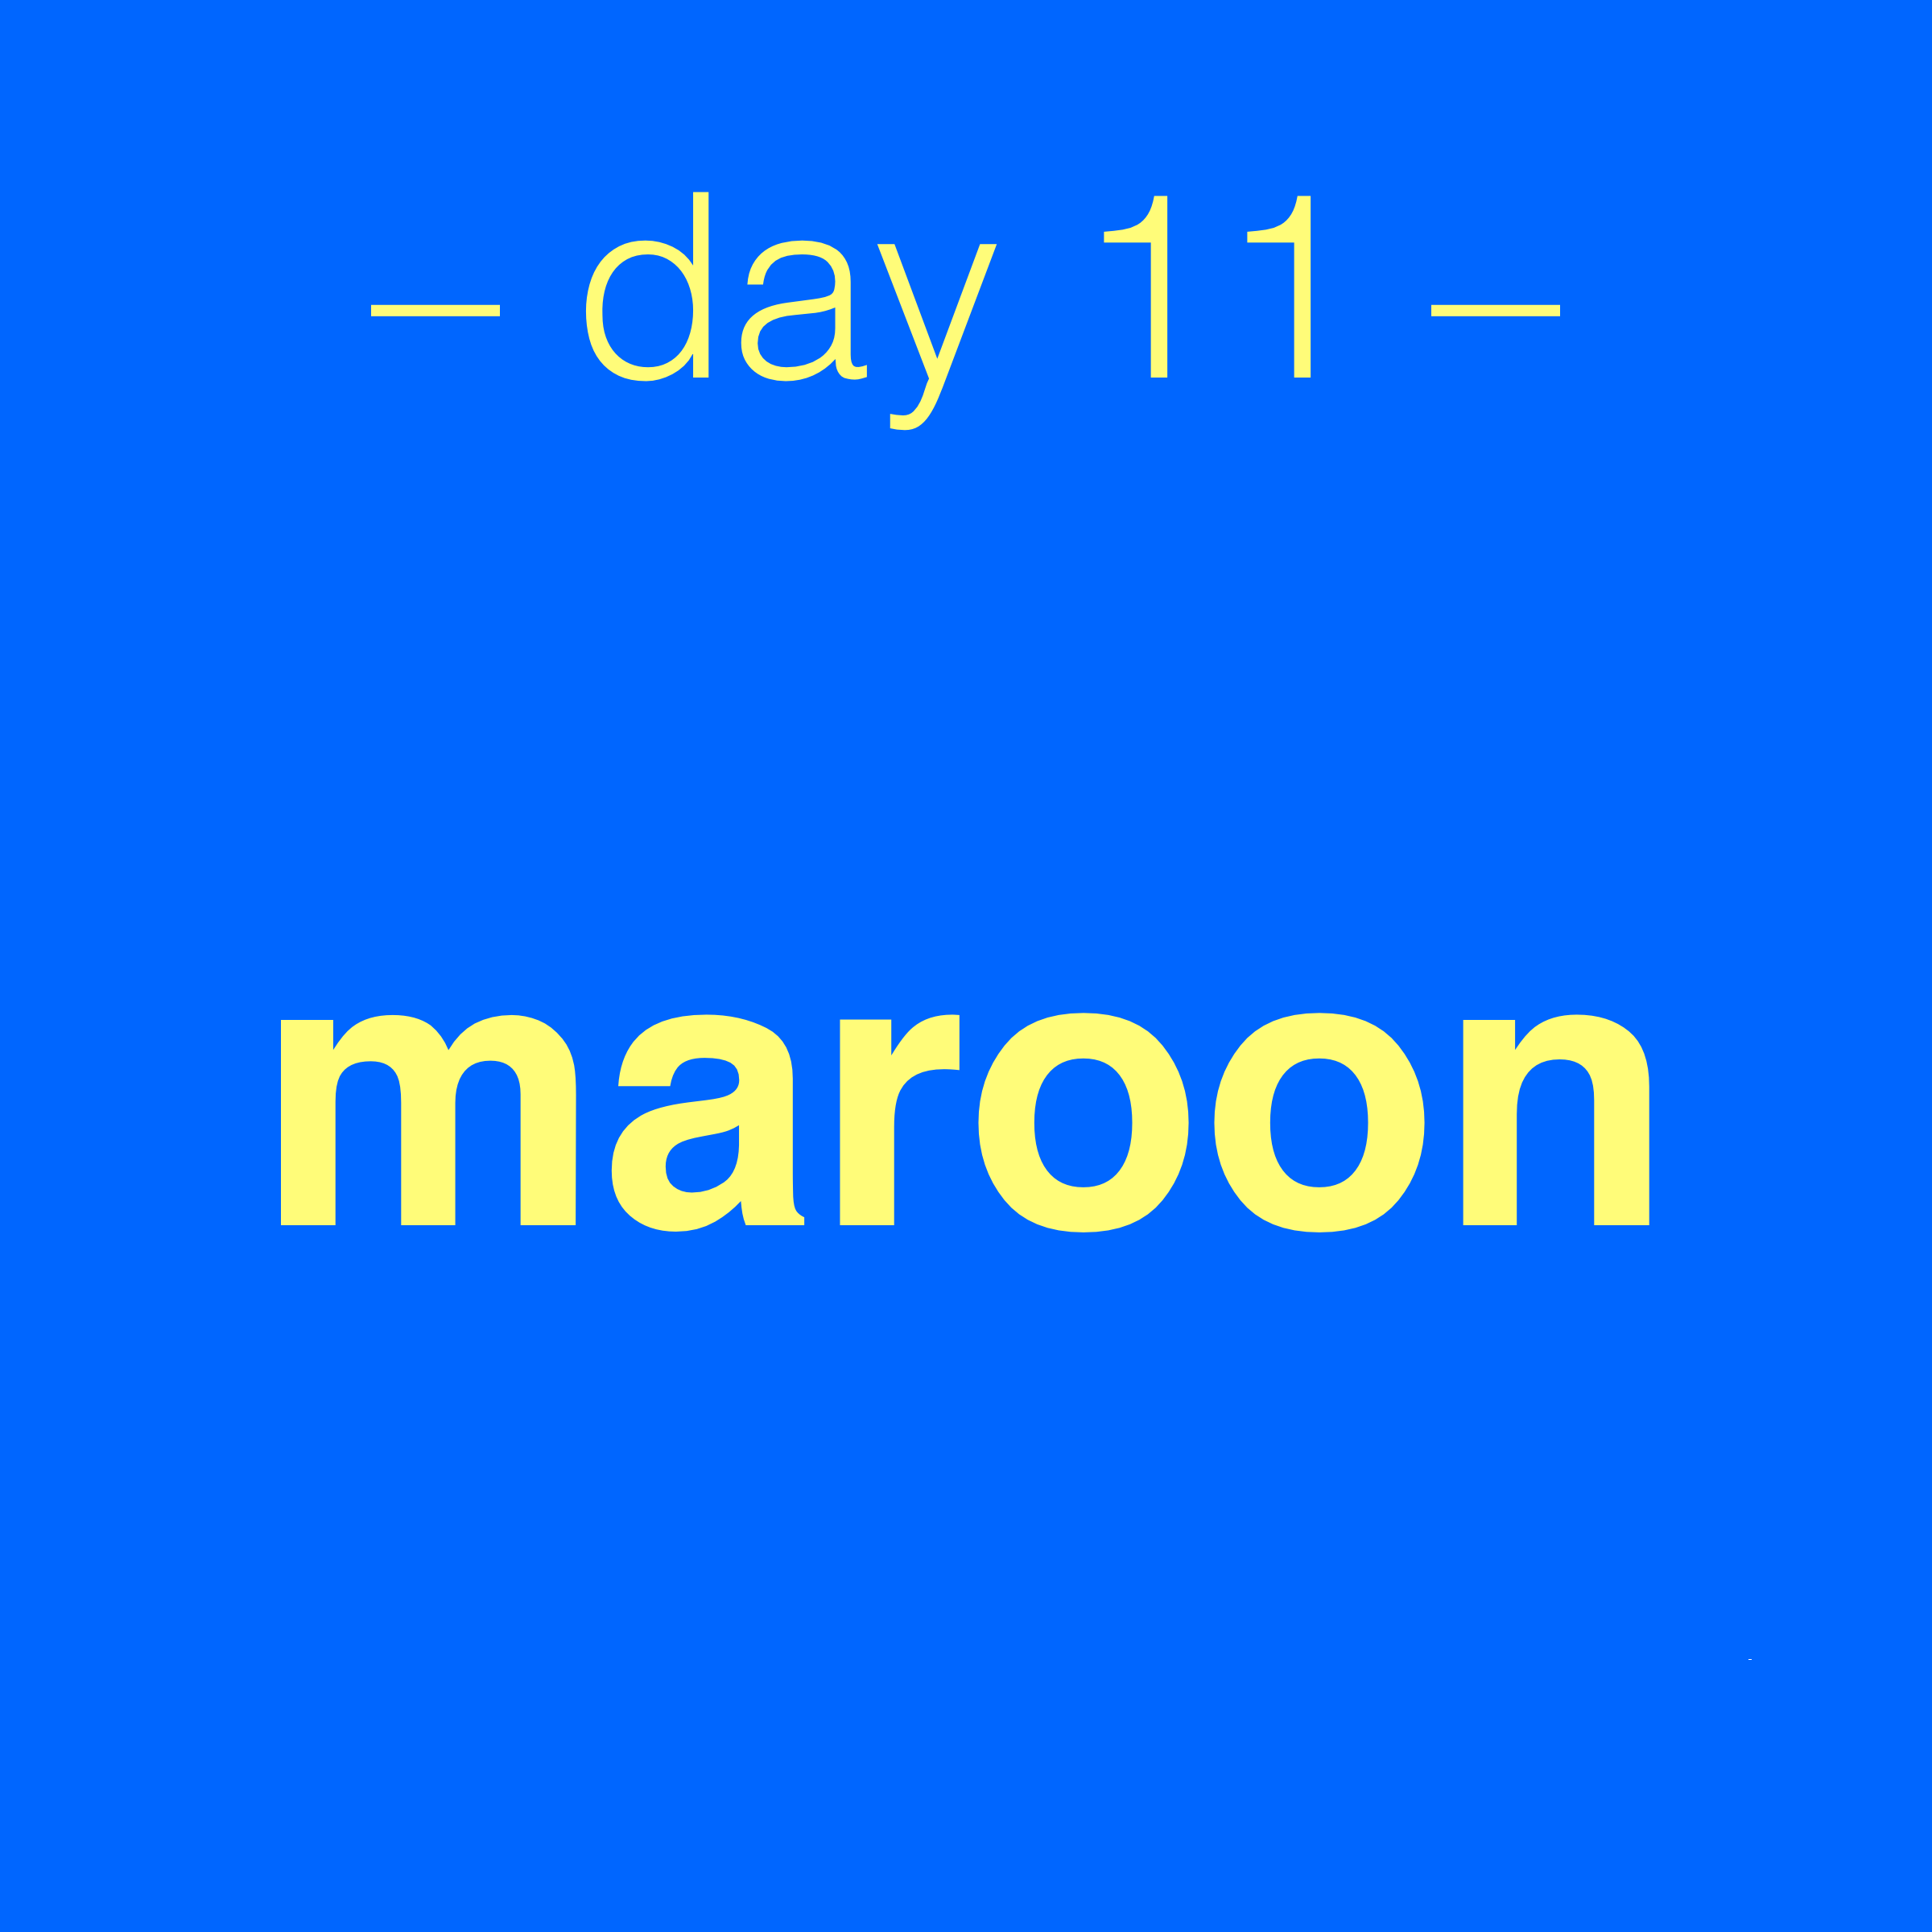 Day 11 graphic: maroon